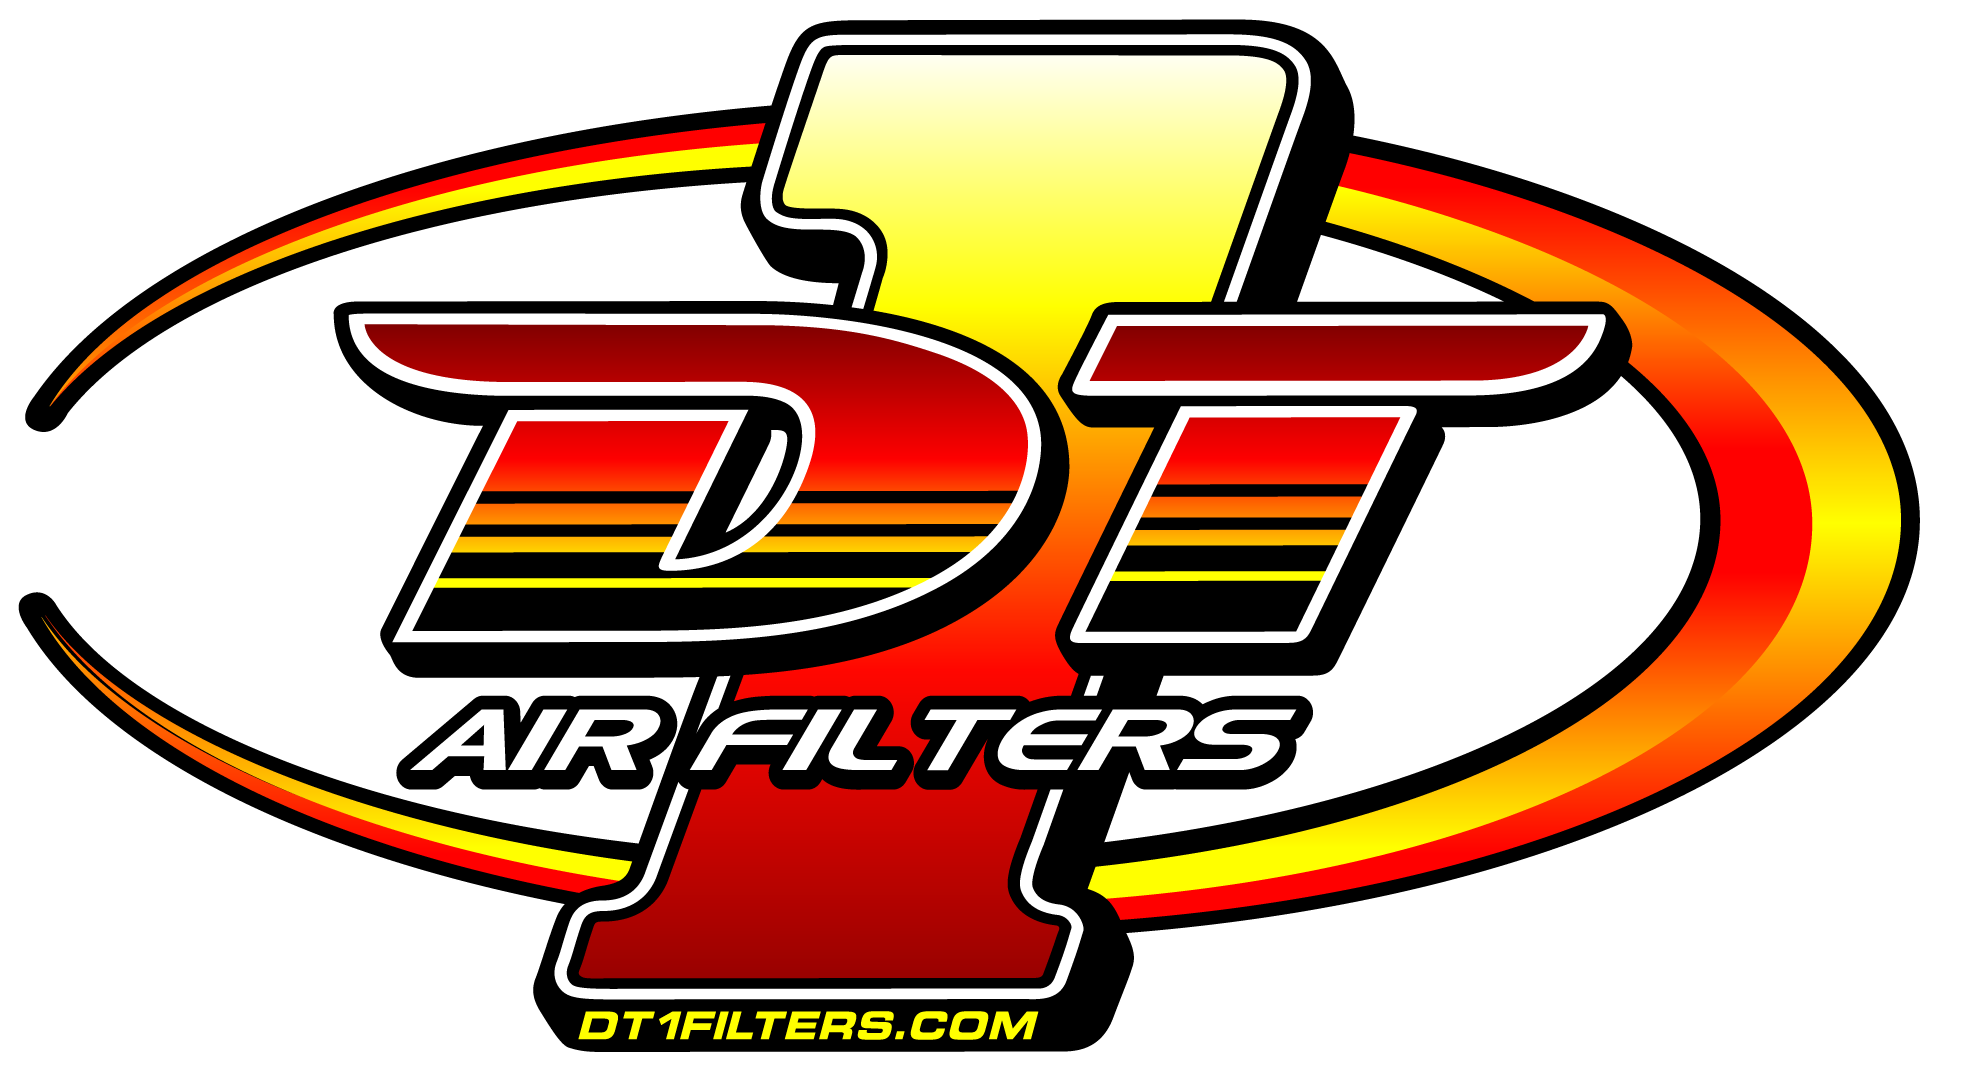 dt1filters